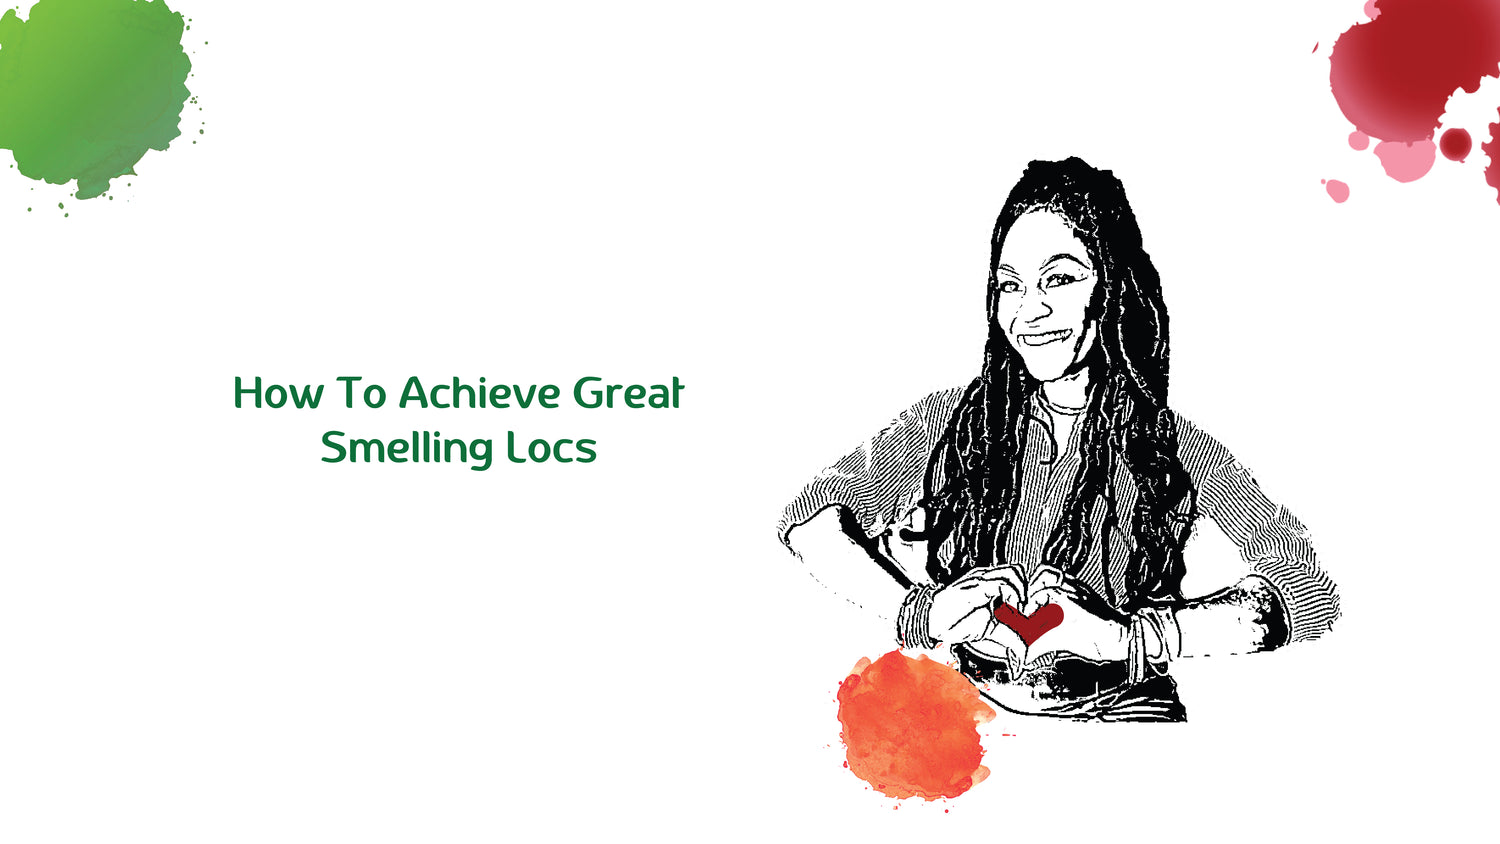 How To Achieve Great Smelling Locs